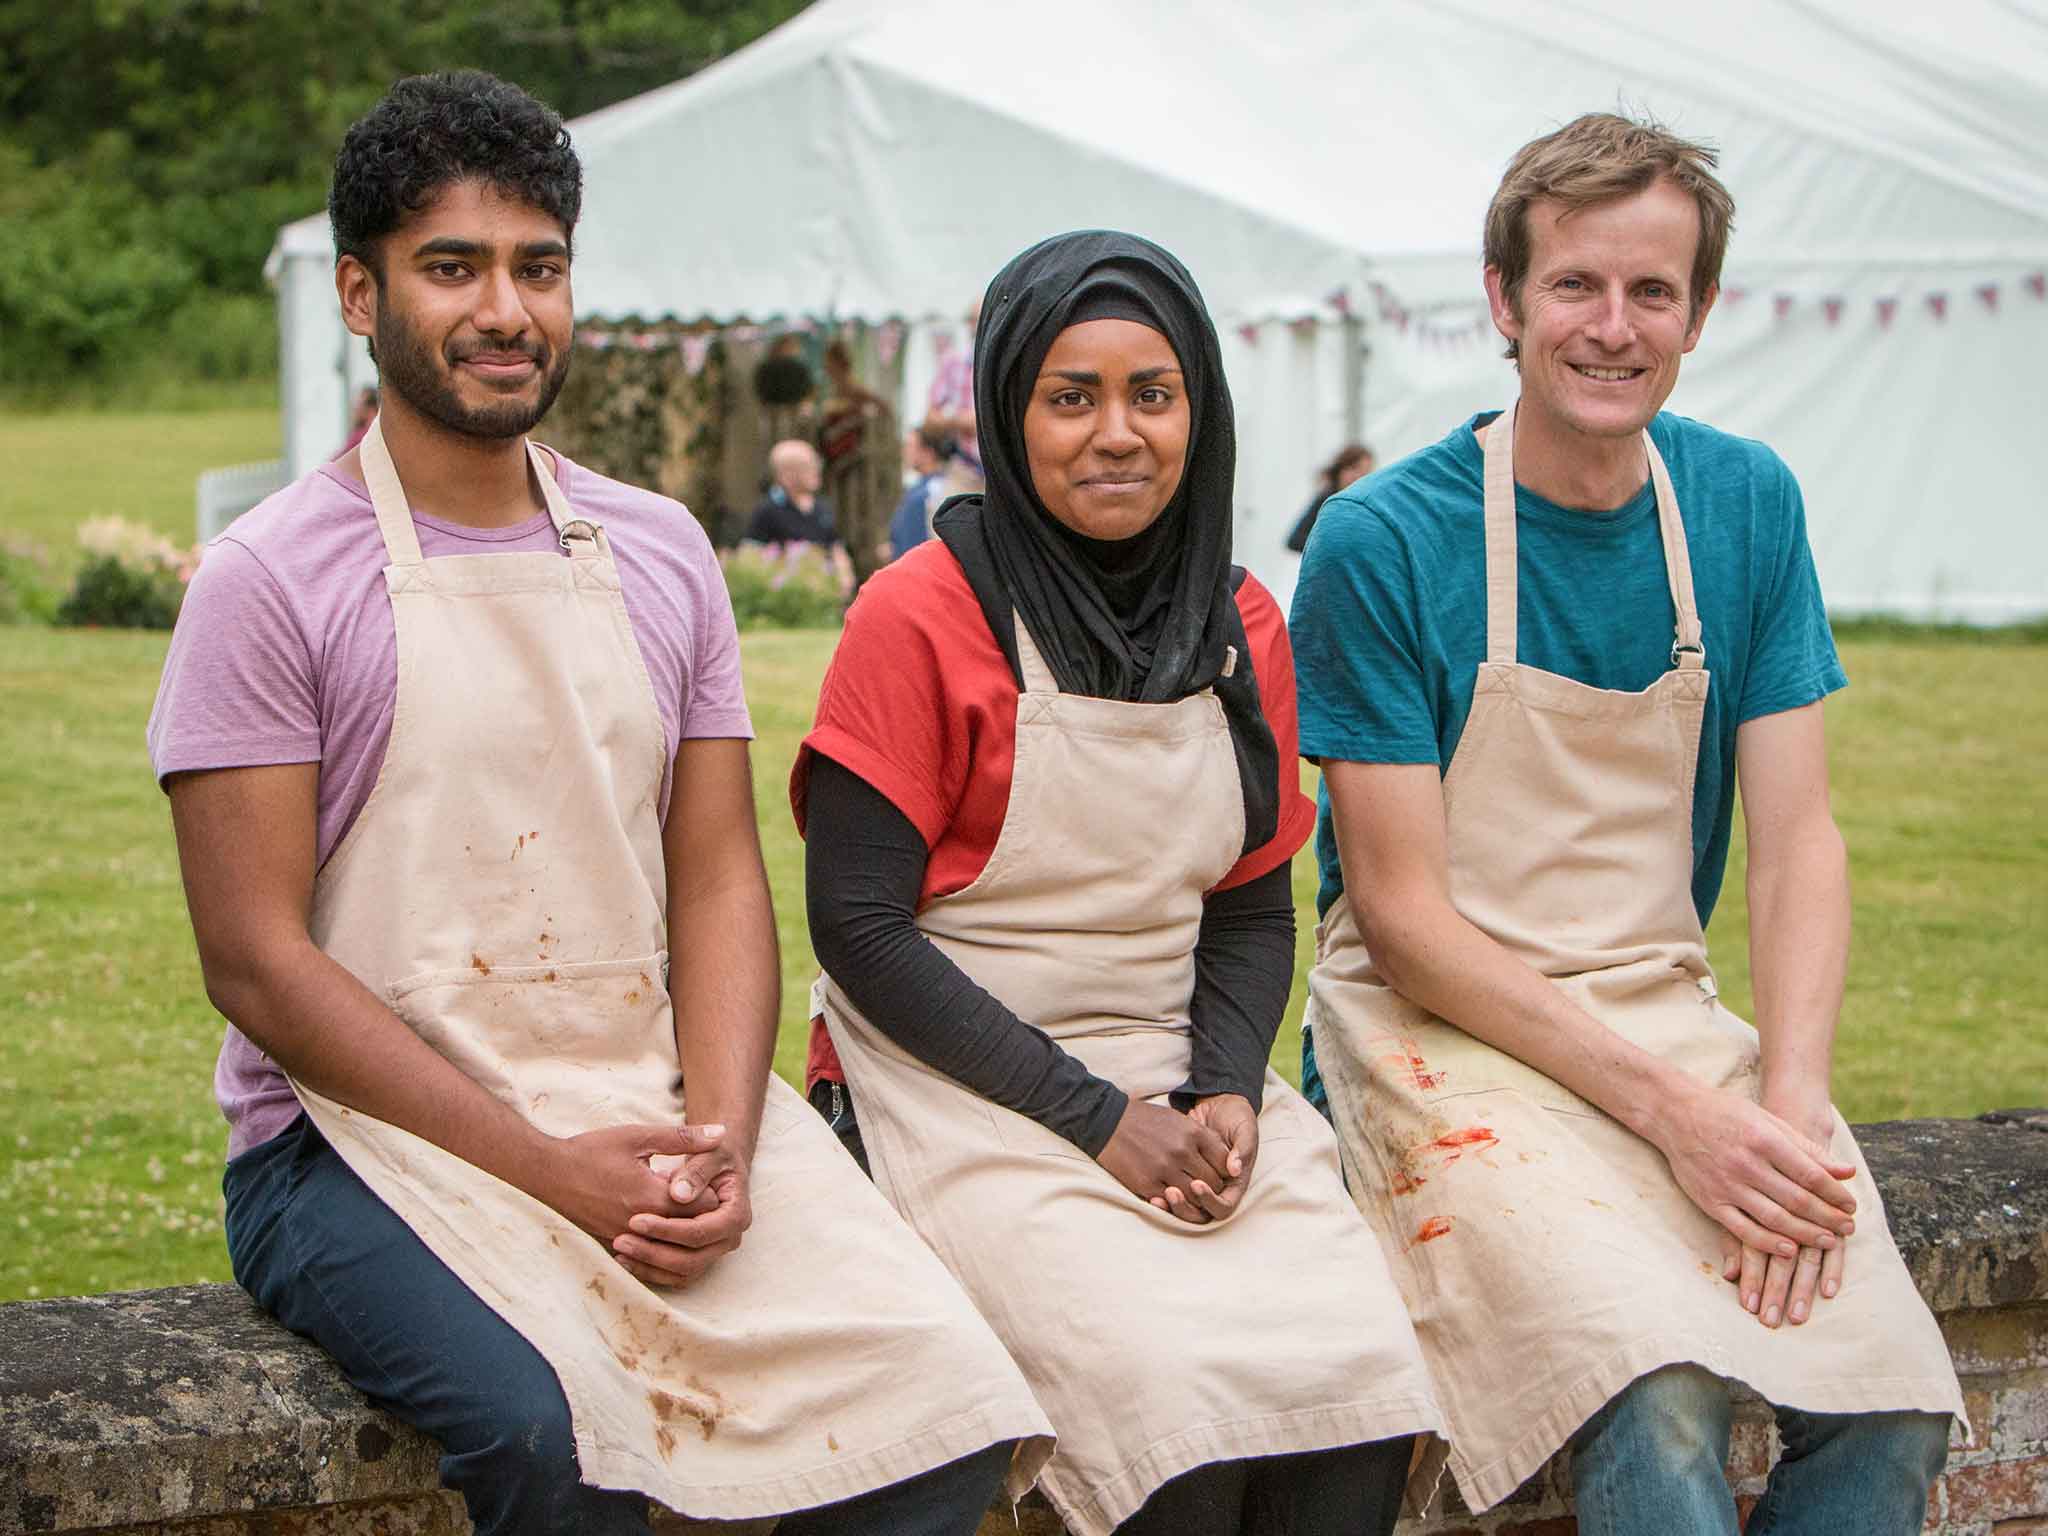 Nadiya Jamir Hussain (centre) has earned the Prime Minister's backing in the Bake Off final